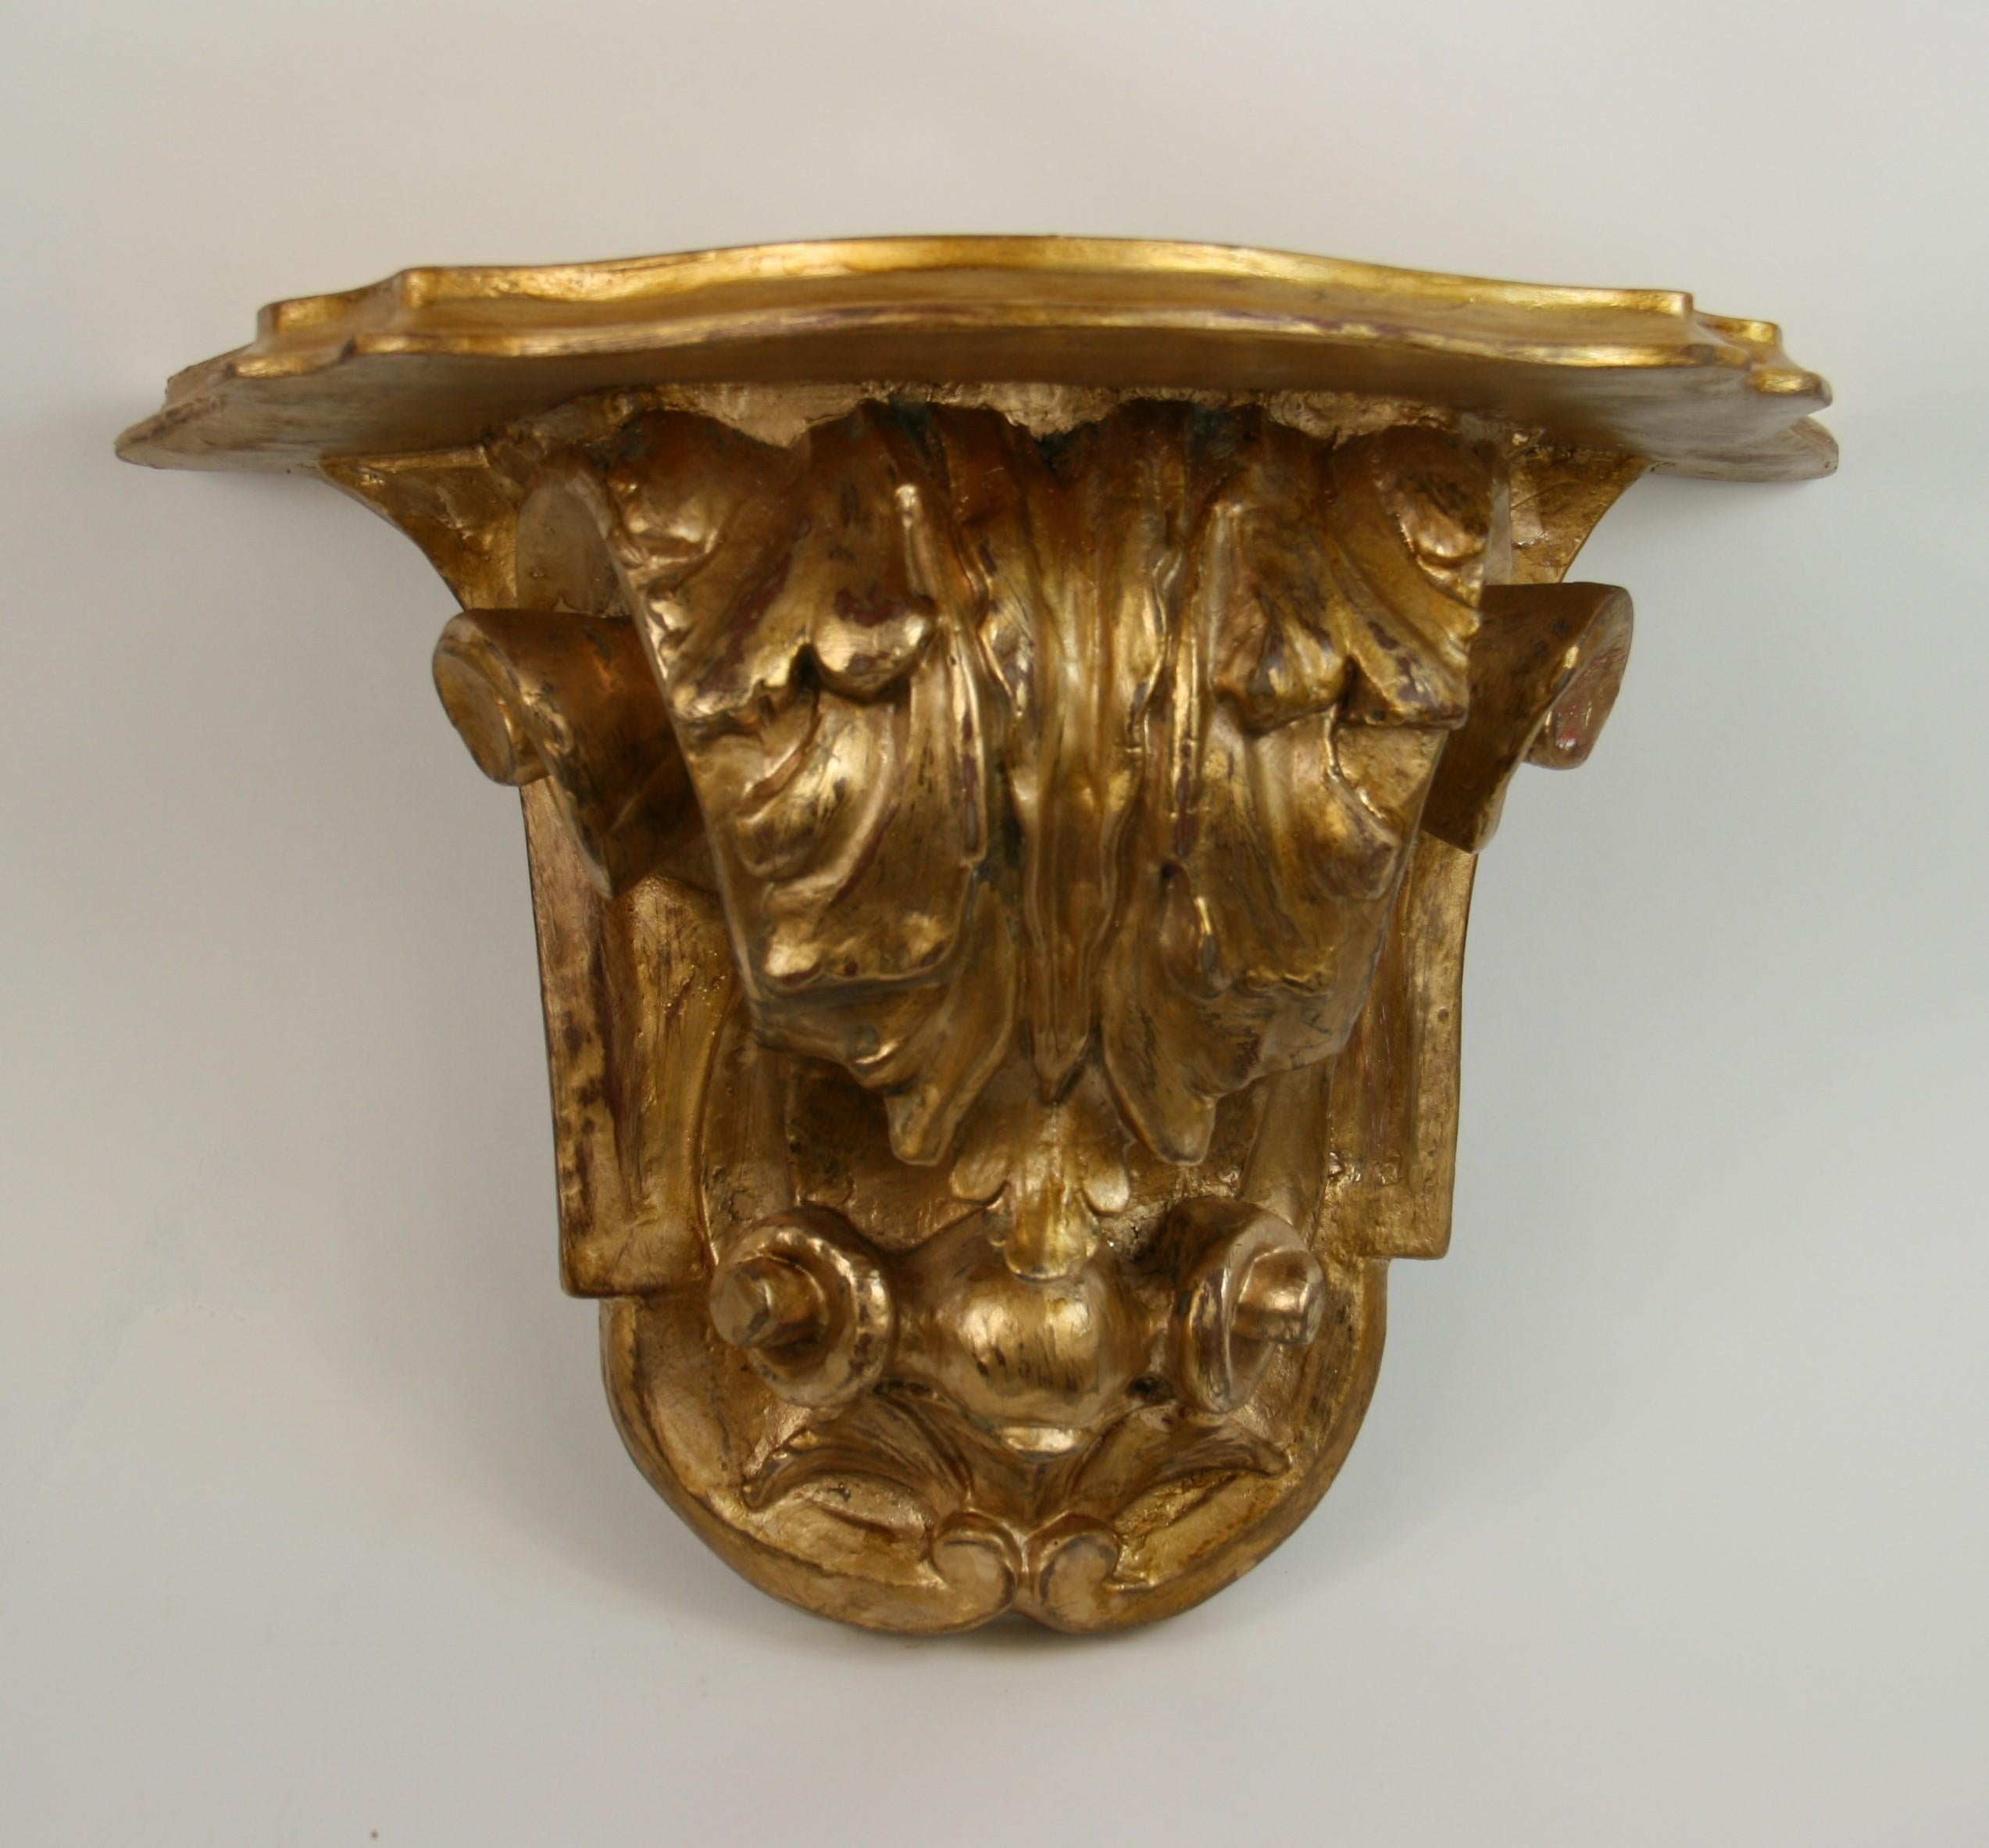 8-264 Italian giltwood and composition oversized wall bracket with elaborate details.